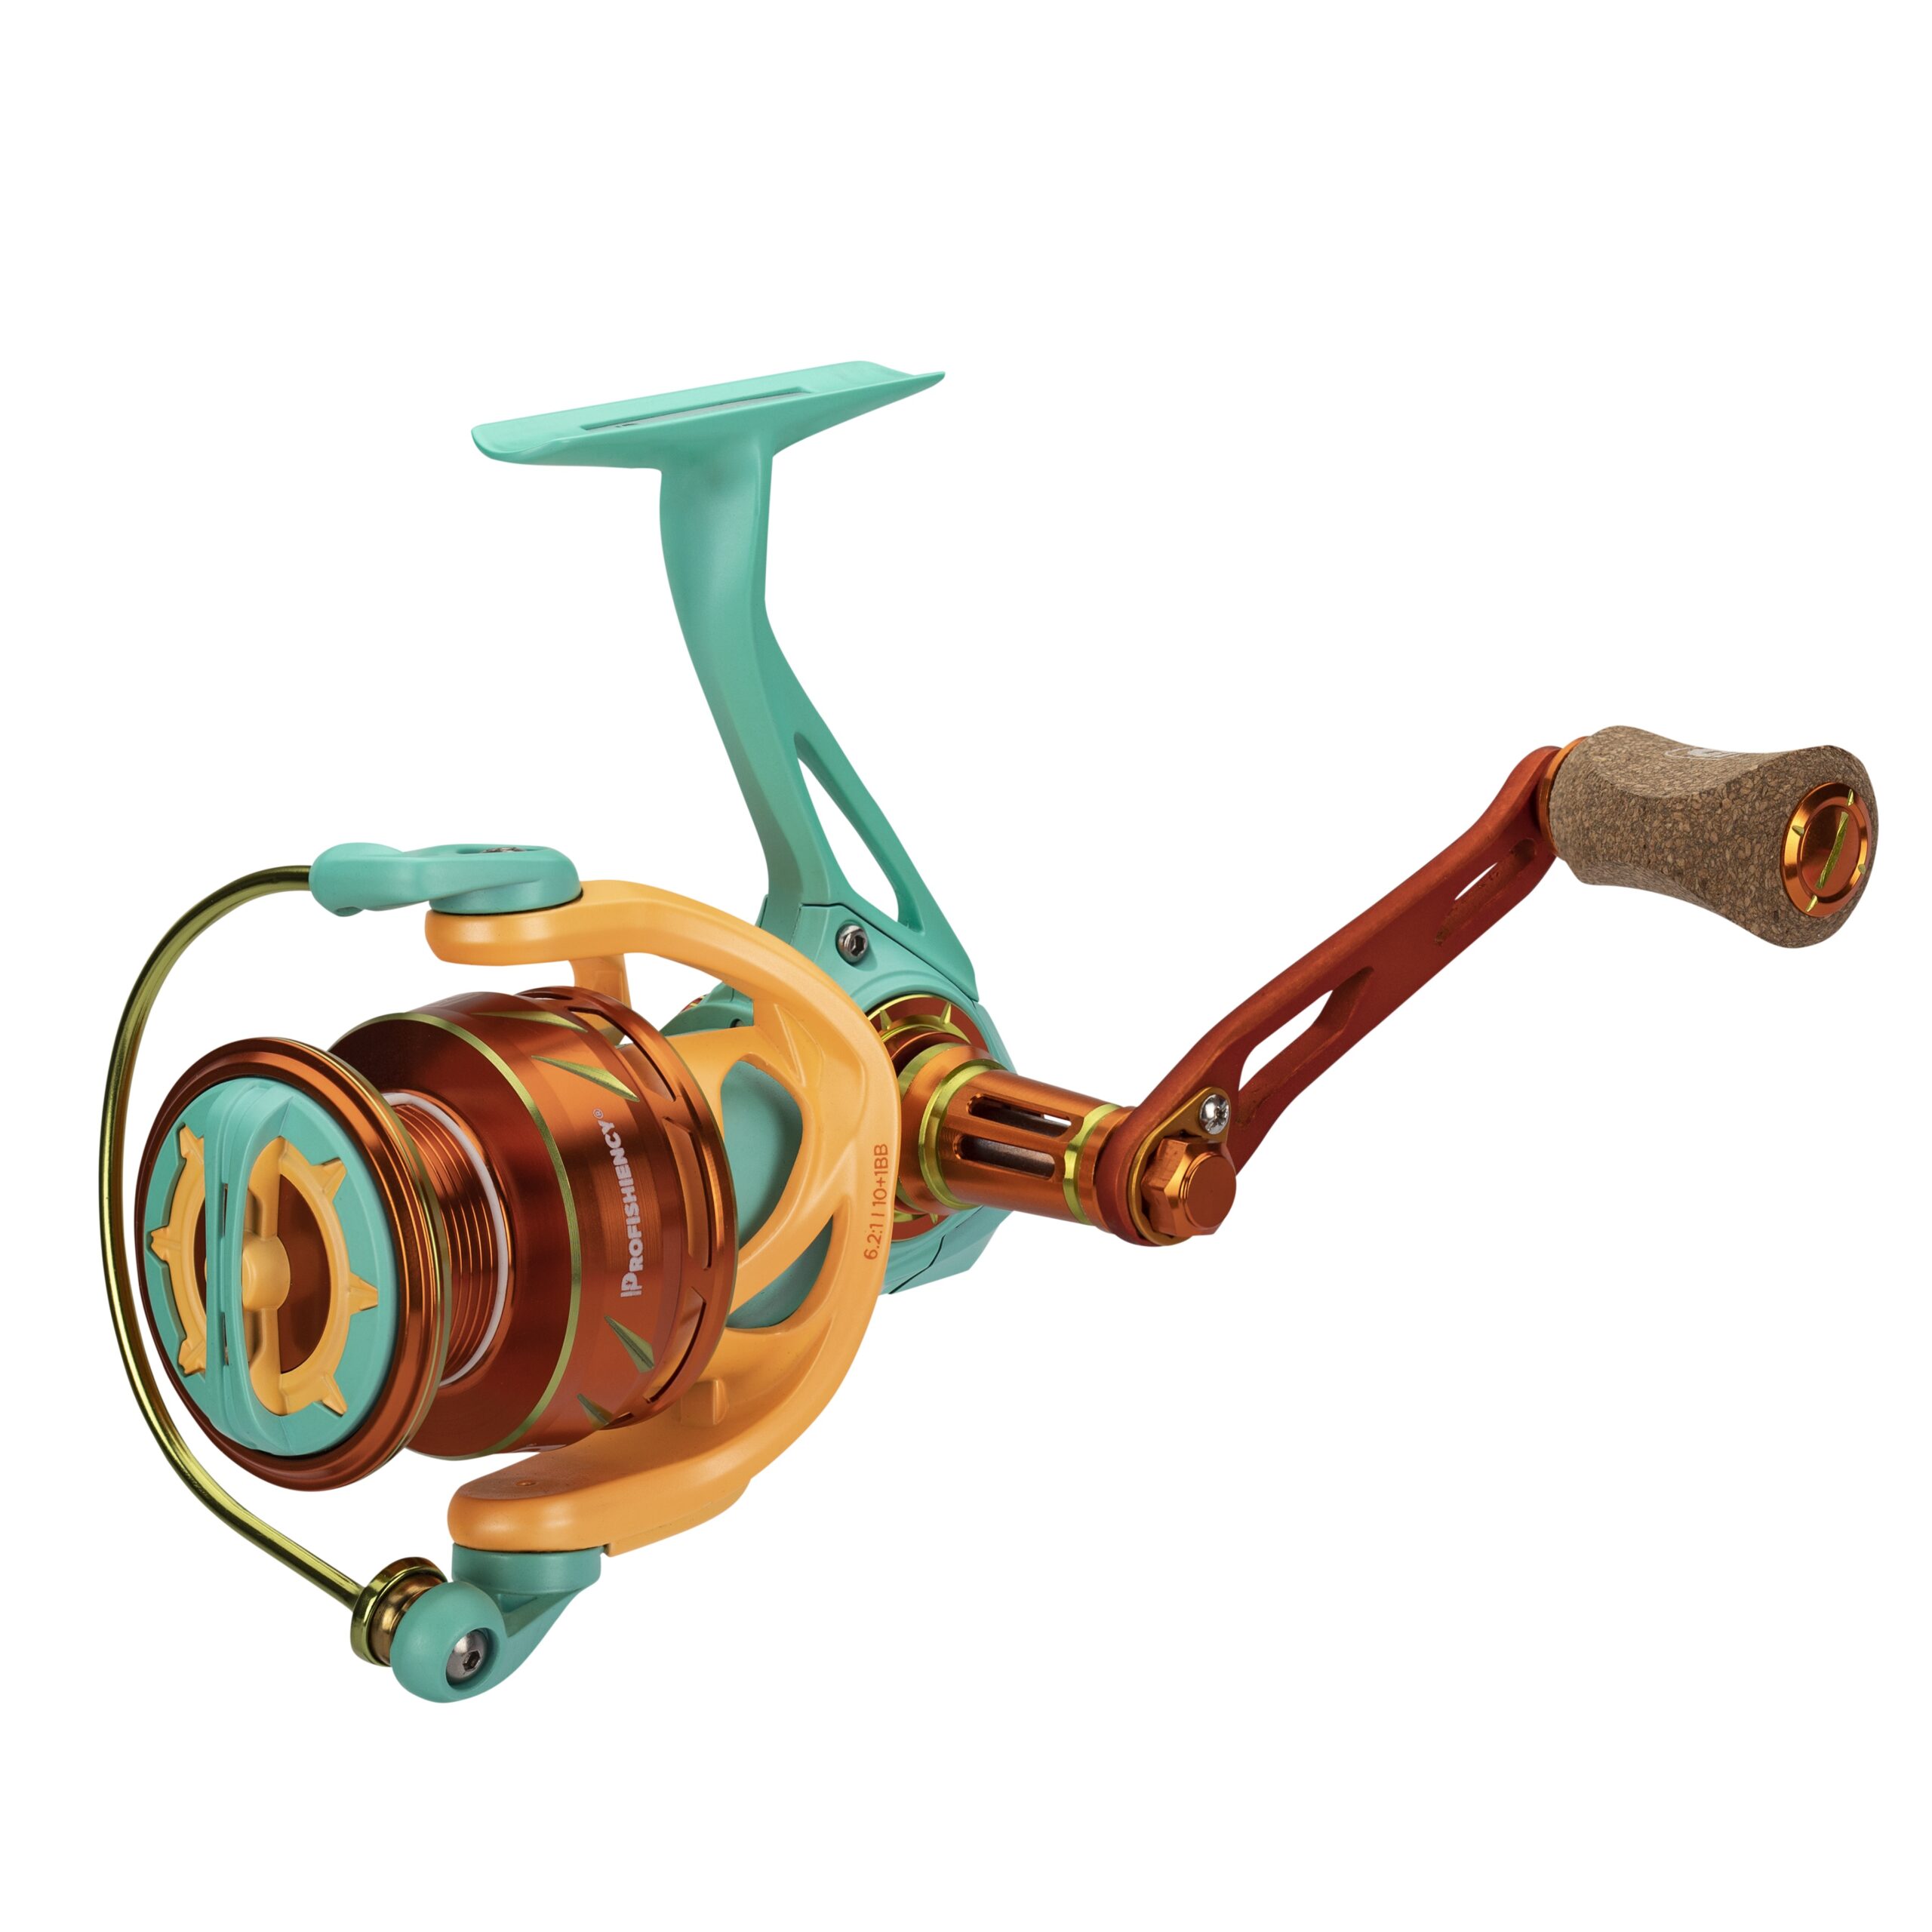 https://cs1.0ps.us/original/opplanet-profishiency-a12-krazy-spin-reel-3000-multicolor-a12-3kkrzy-main